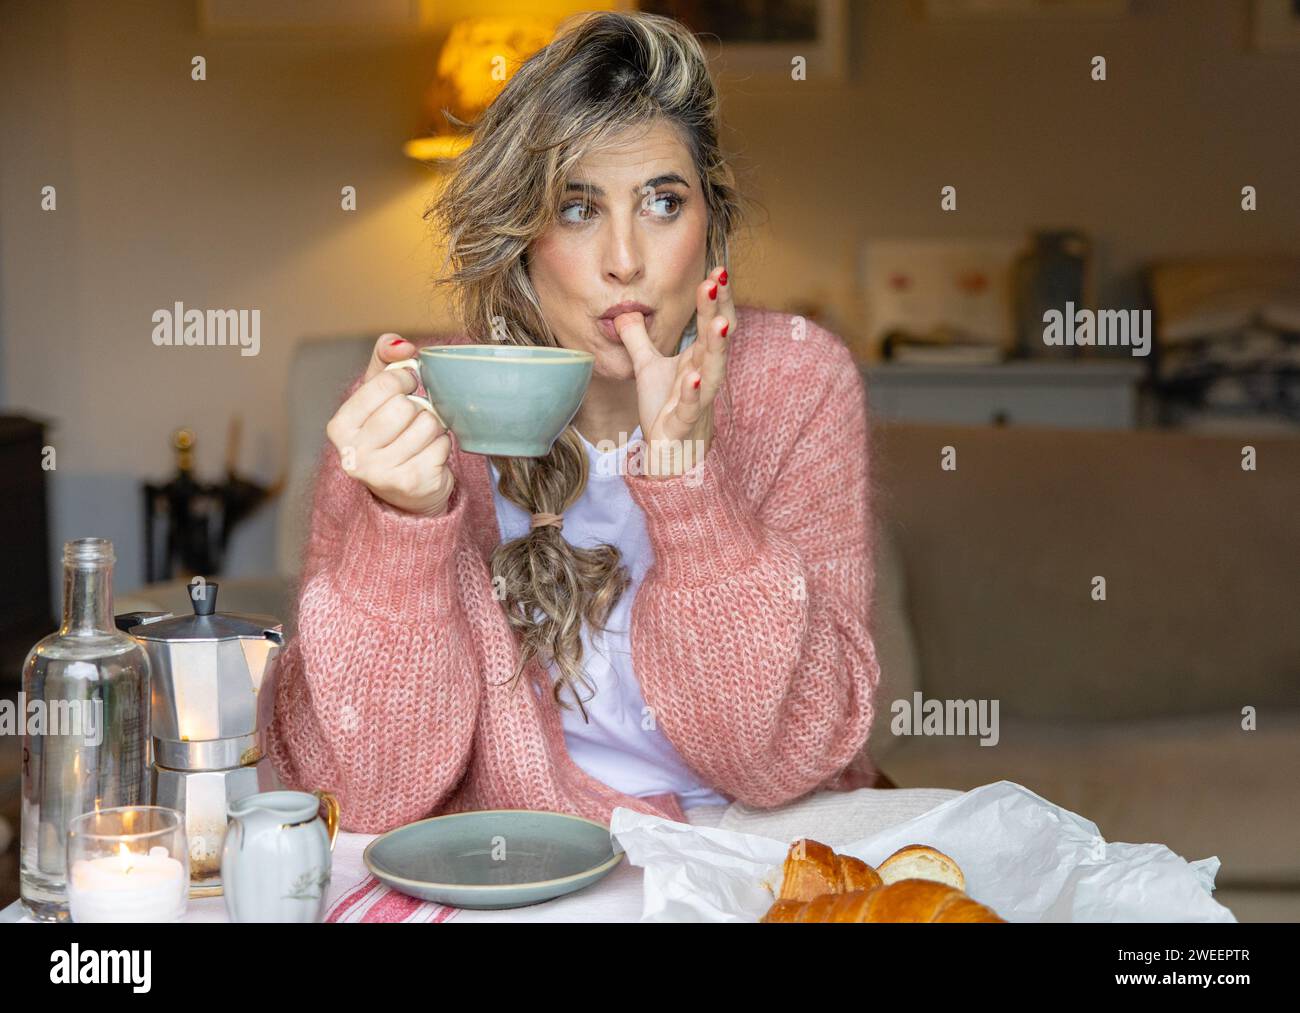 A young woman in a knit sweater appears pensive as she enjoys a cup of coffee, with pastries laid out in front. Stock Photo